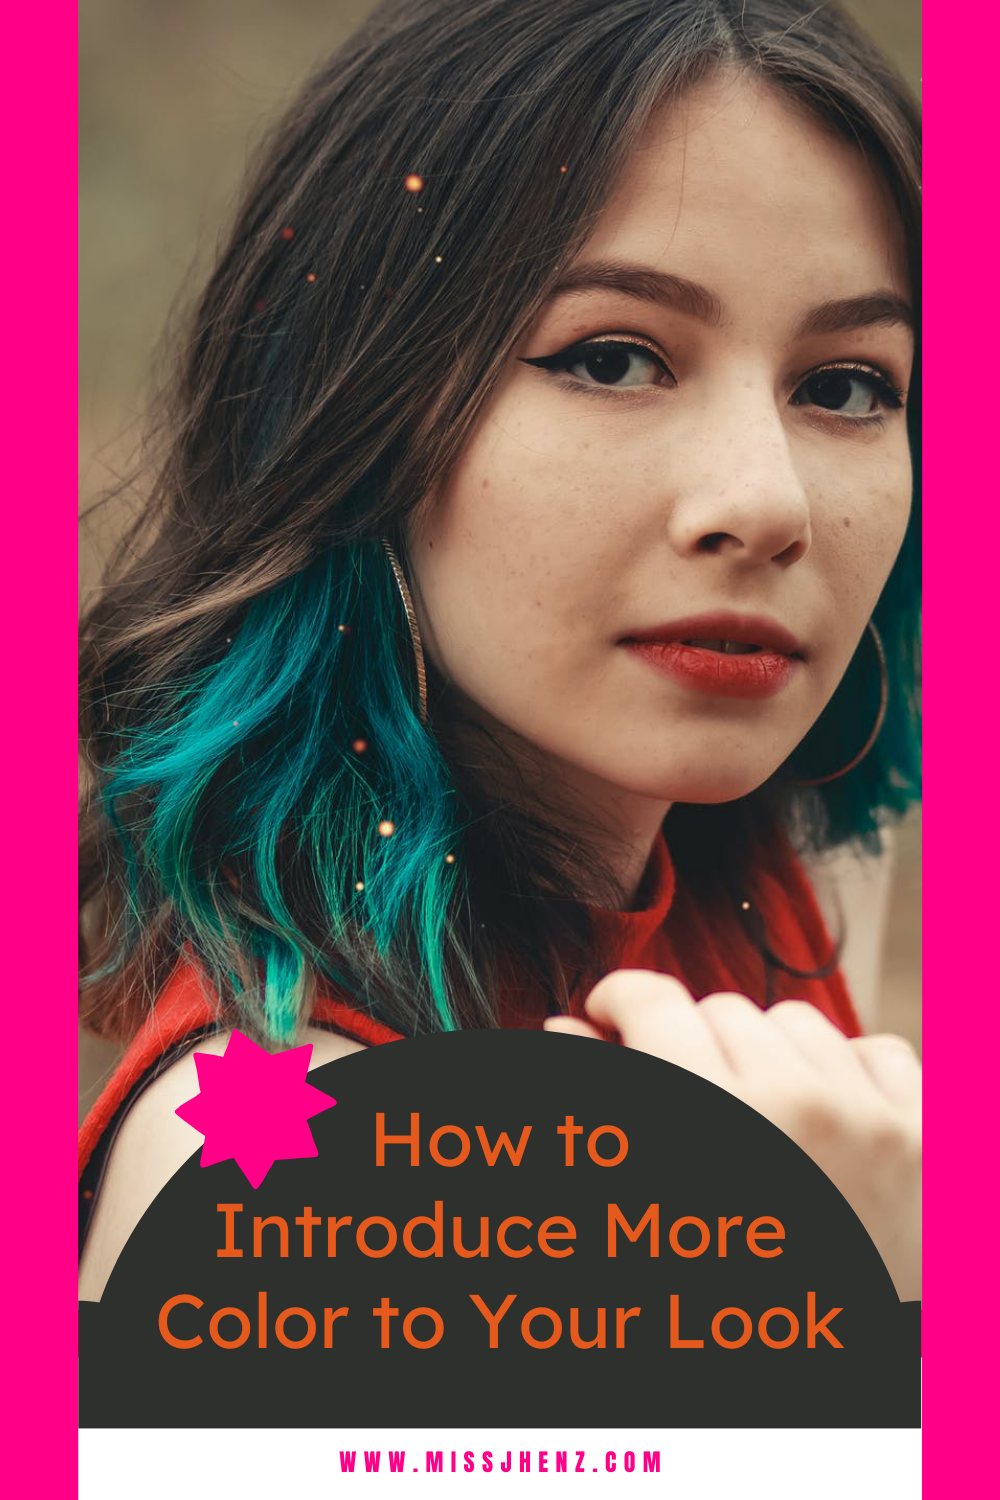 How to Introduce More Color to Your Look